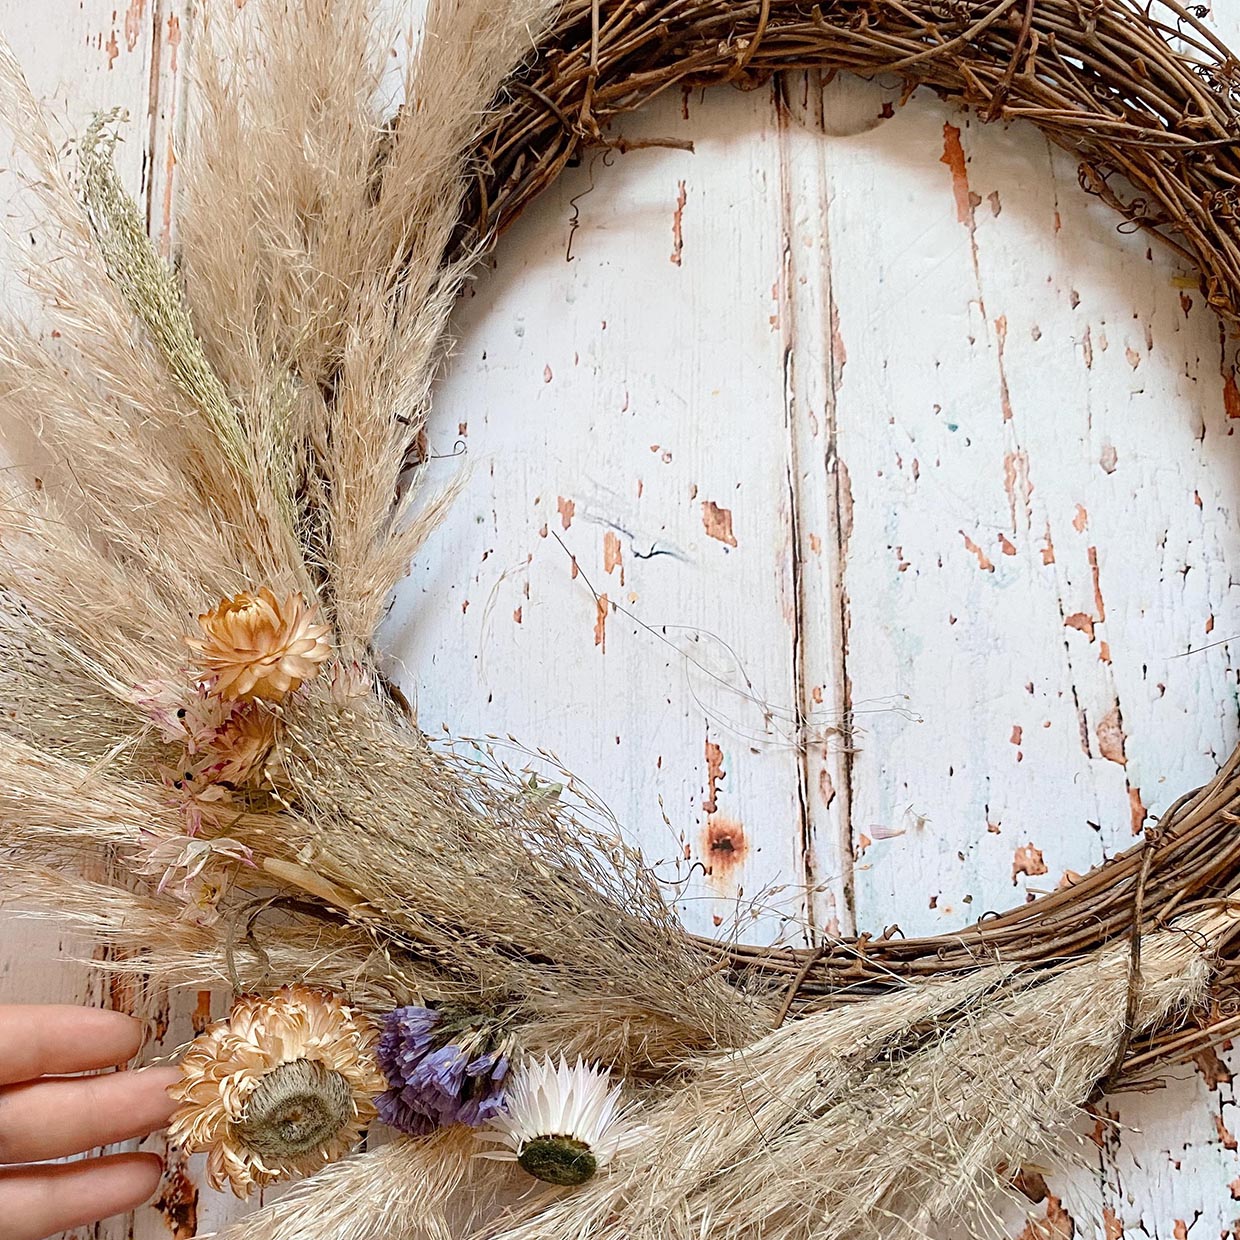 How to make a fall wreath – add dried flowers